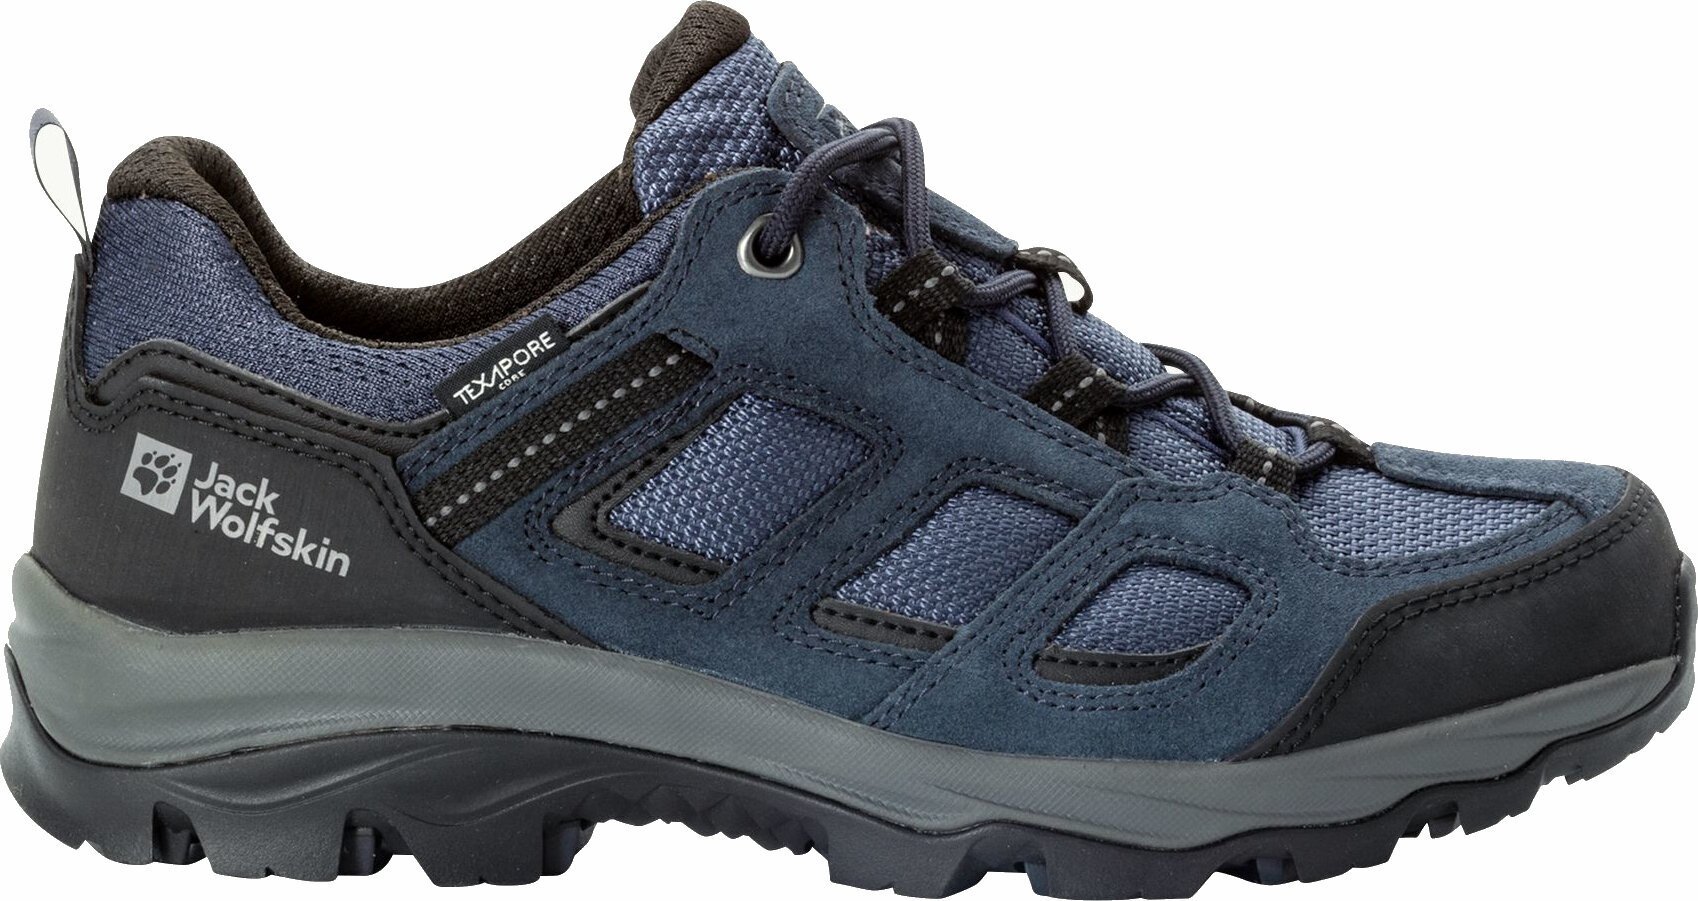 Womens Outdoor Shoes Jack Wolfskin Vojo 3 Texapore Low W Graphite 39 Womens Outdoor Shoes